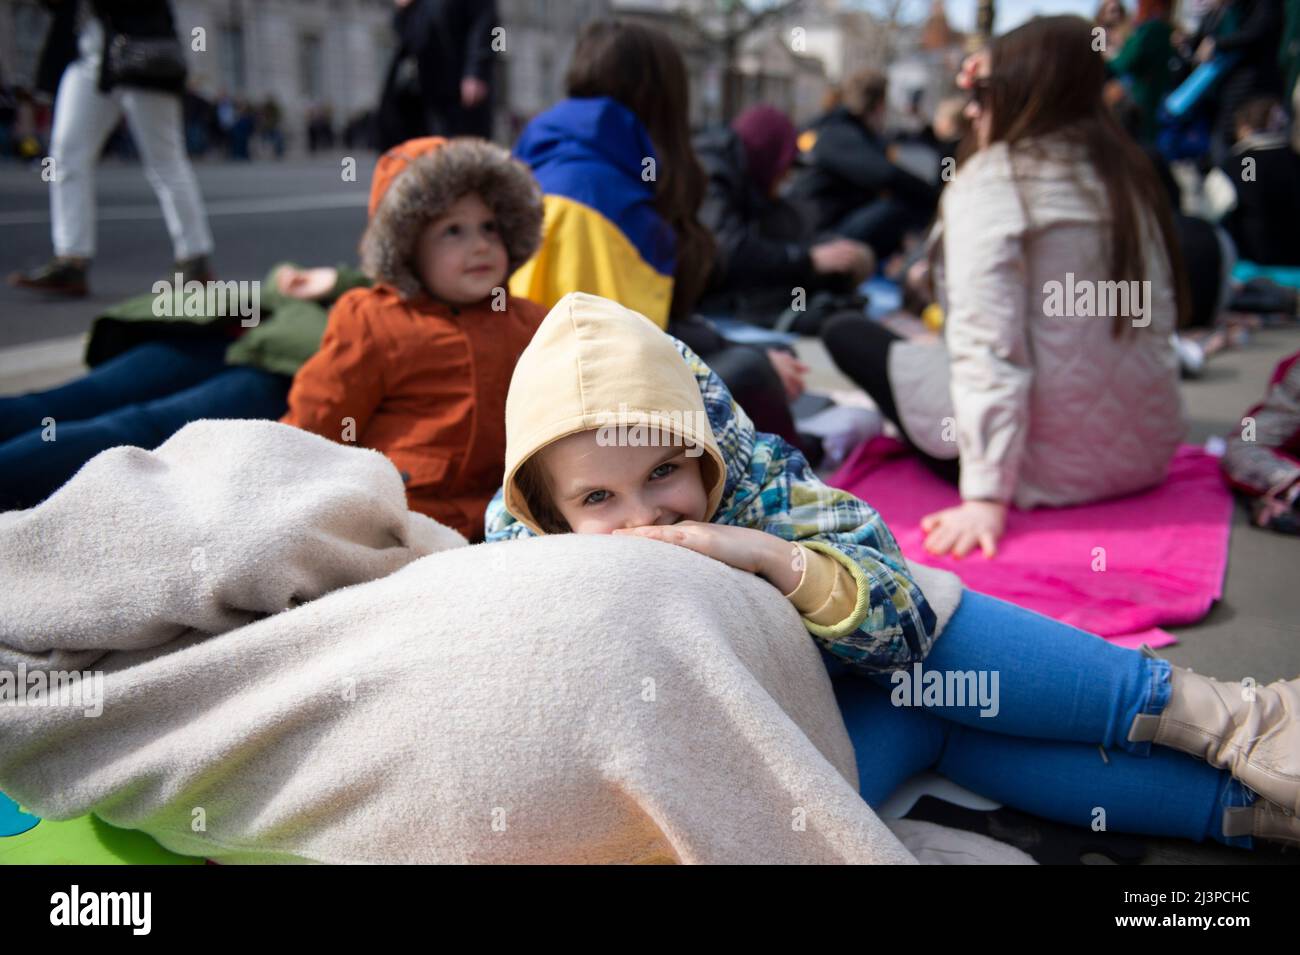 London, UK. 9th Apr, 2022. Demonstraters take part in a 'Die In' outside Downing Street in London, to denounce the Russian invasion of Ukraine. Credit: claire doherty/Alamy Live News Stock Photo